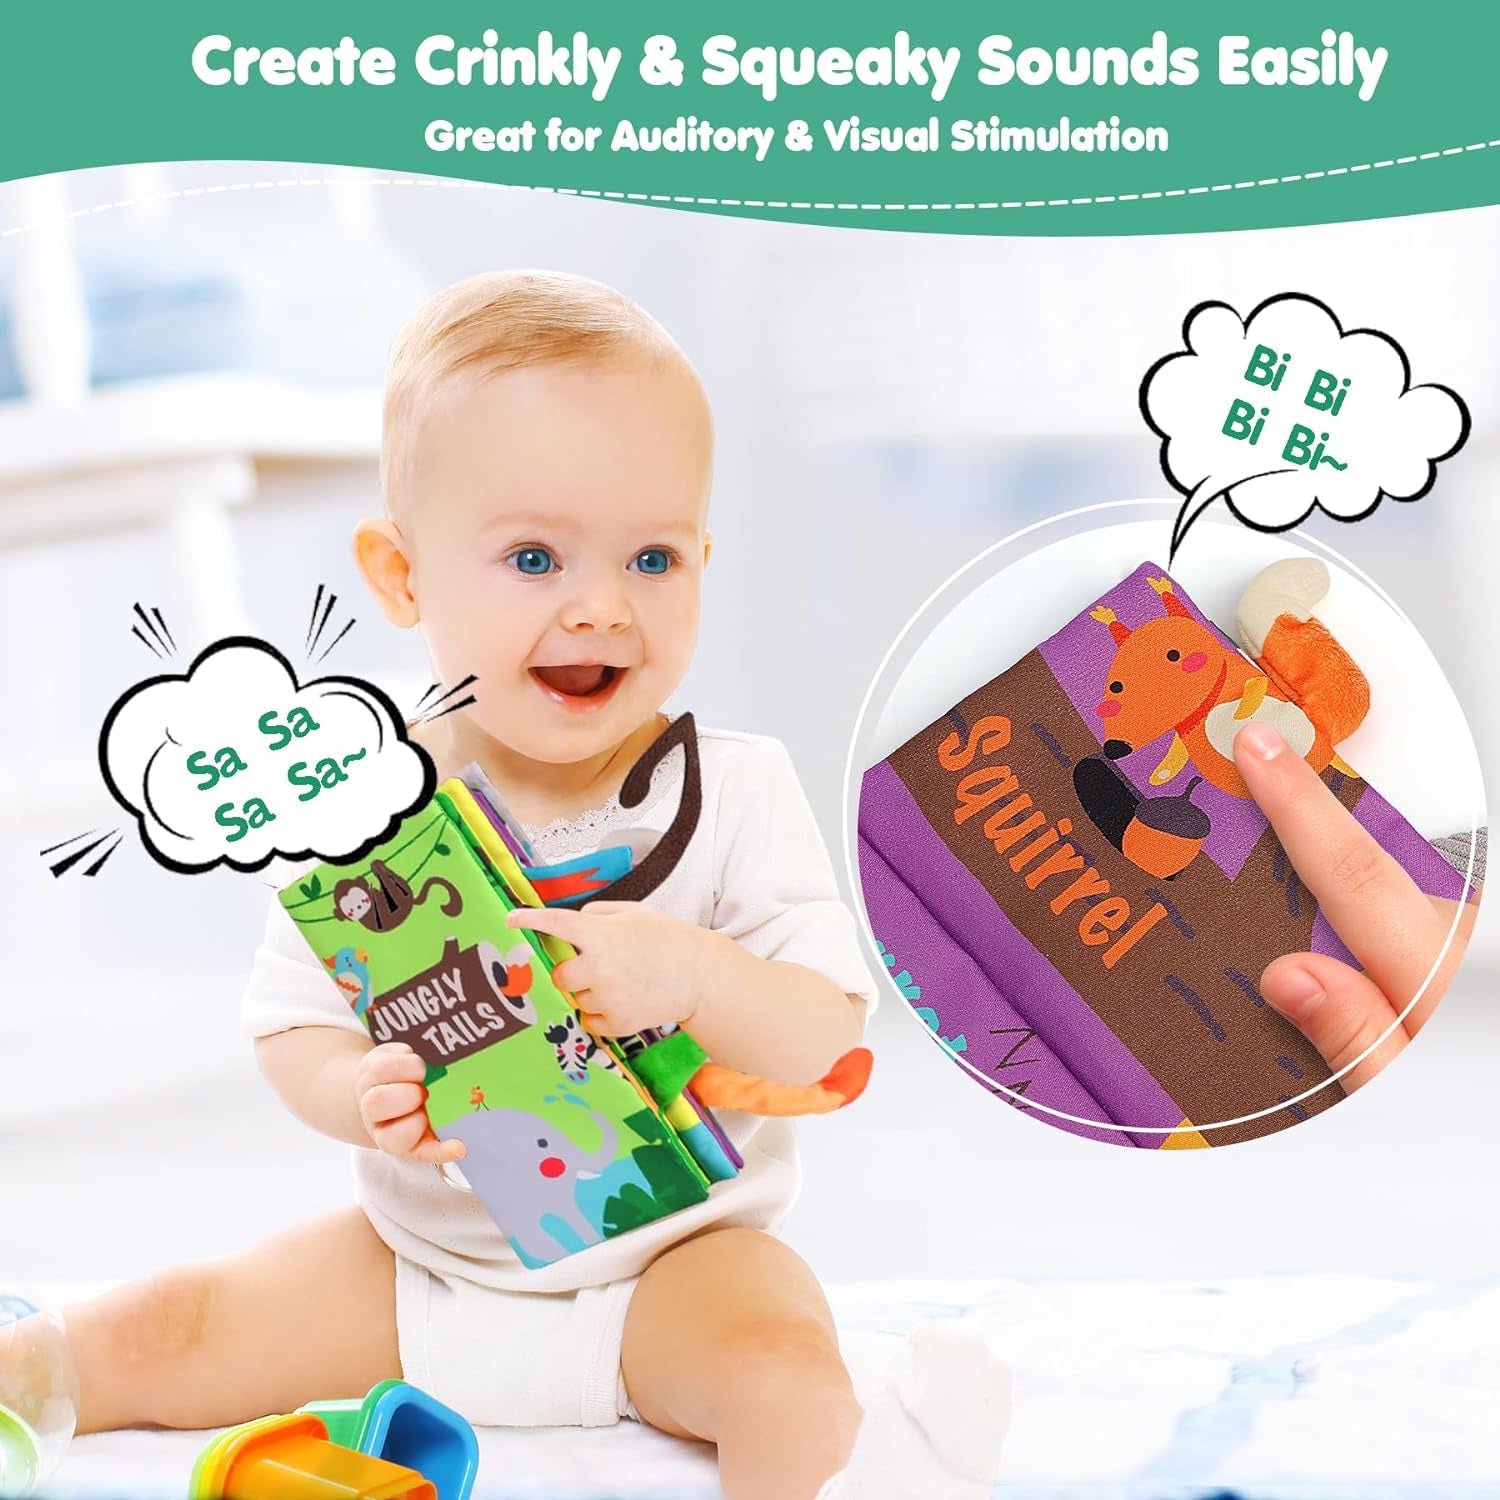 Baby Books Toys, Touch and Feel Crinkle Cloth Book for Infant Baby 0-3-6-12-18 Months, Early Development Interactive Stroller Soft Toys, Shower Gifts Christmas Stocking Stuffers for Boys Girls